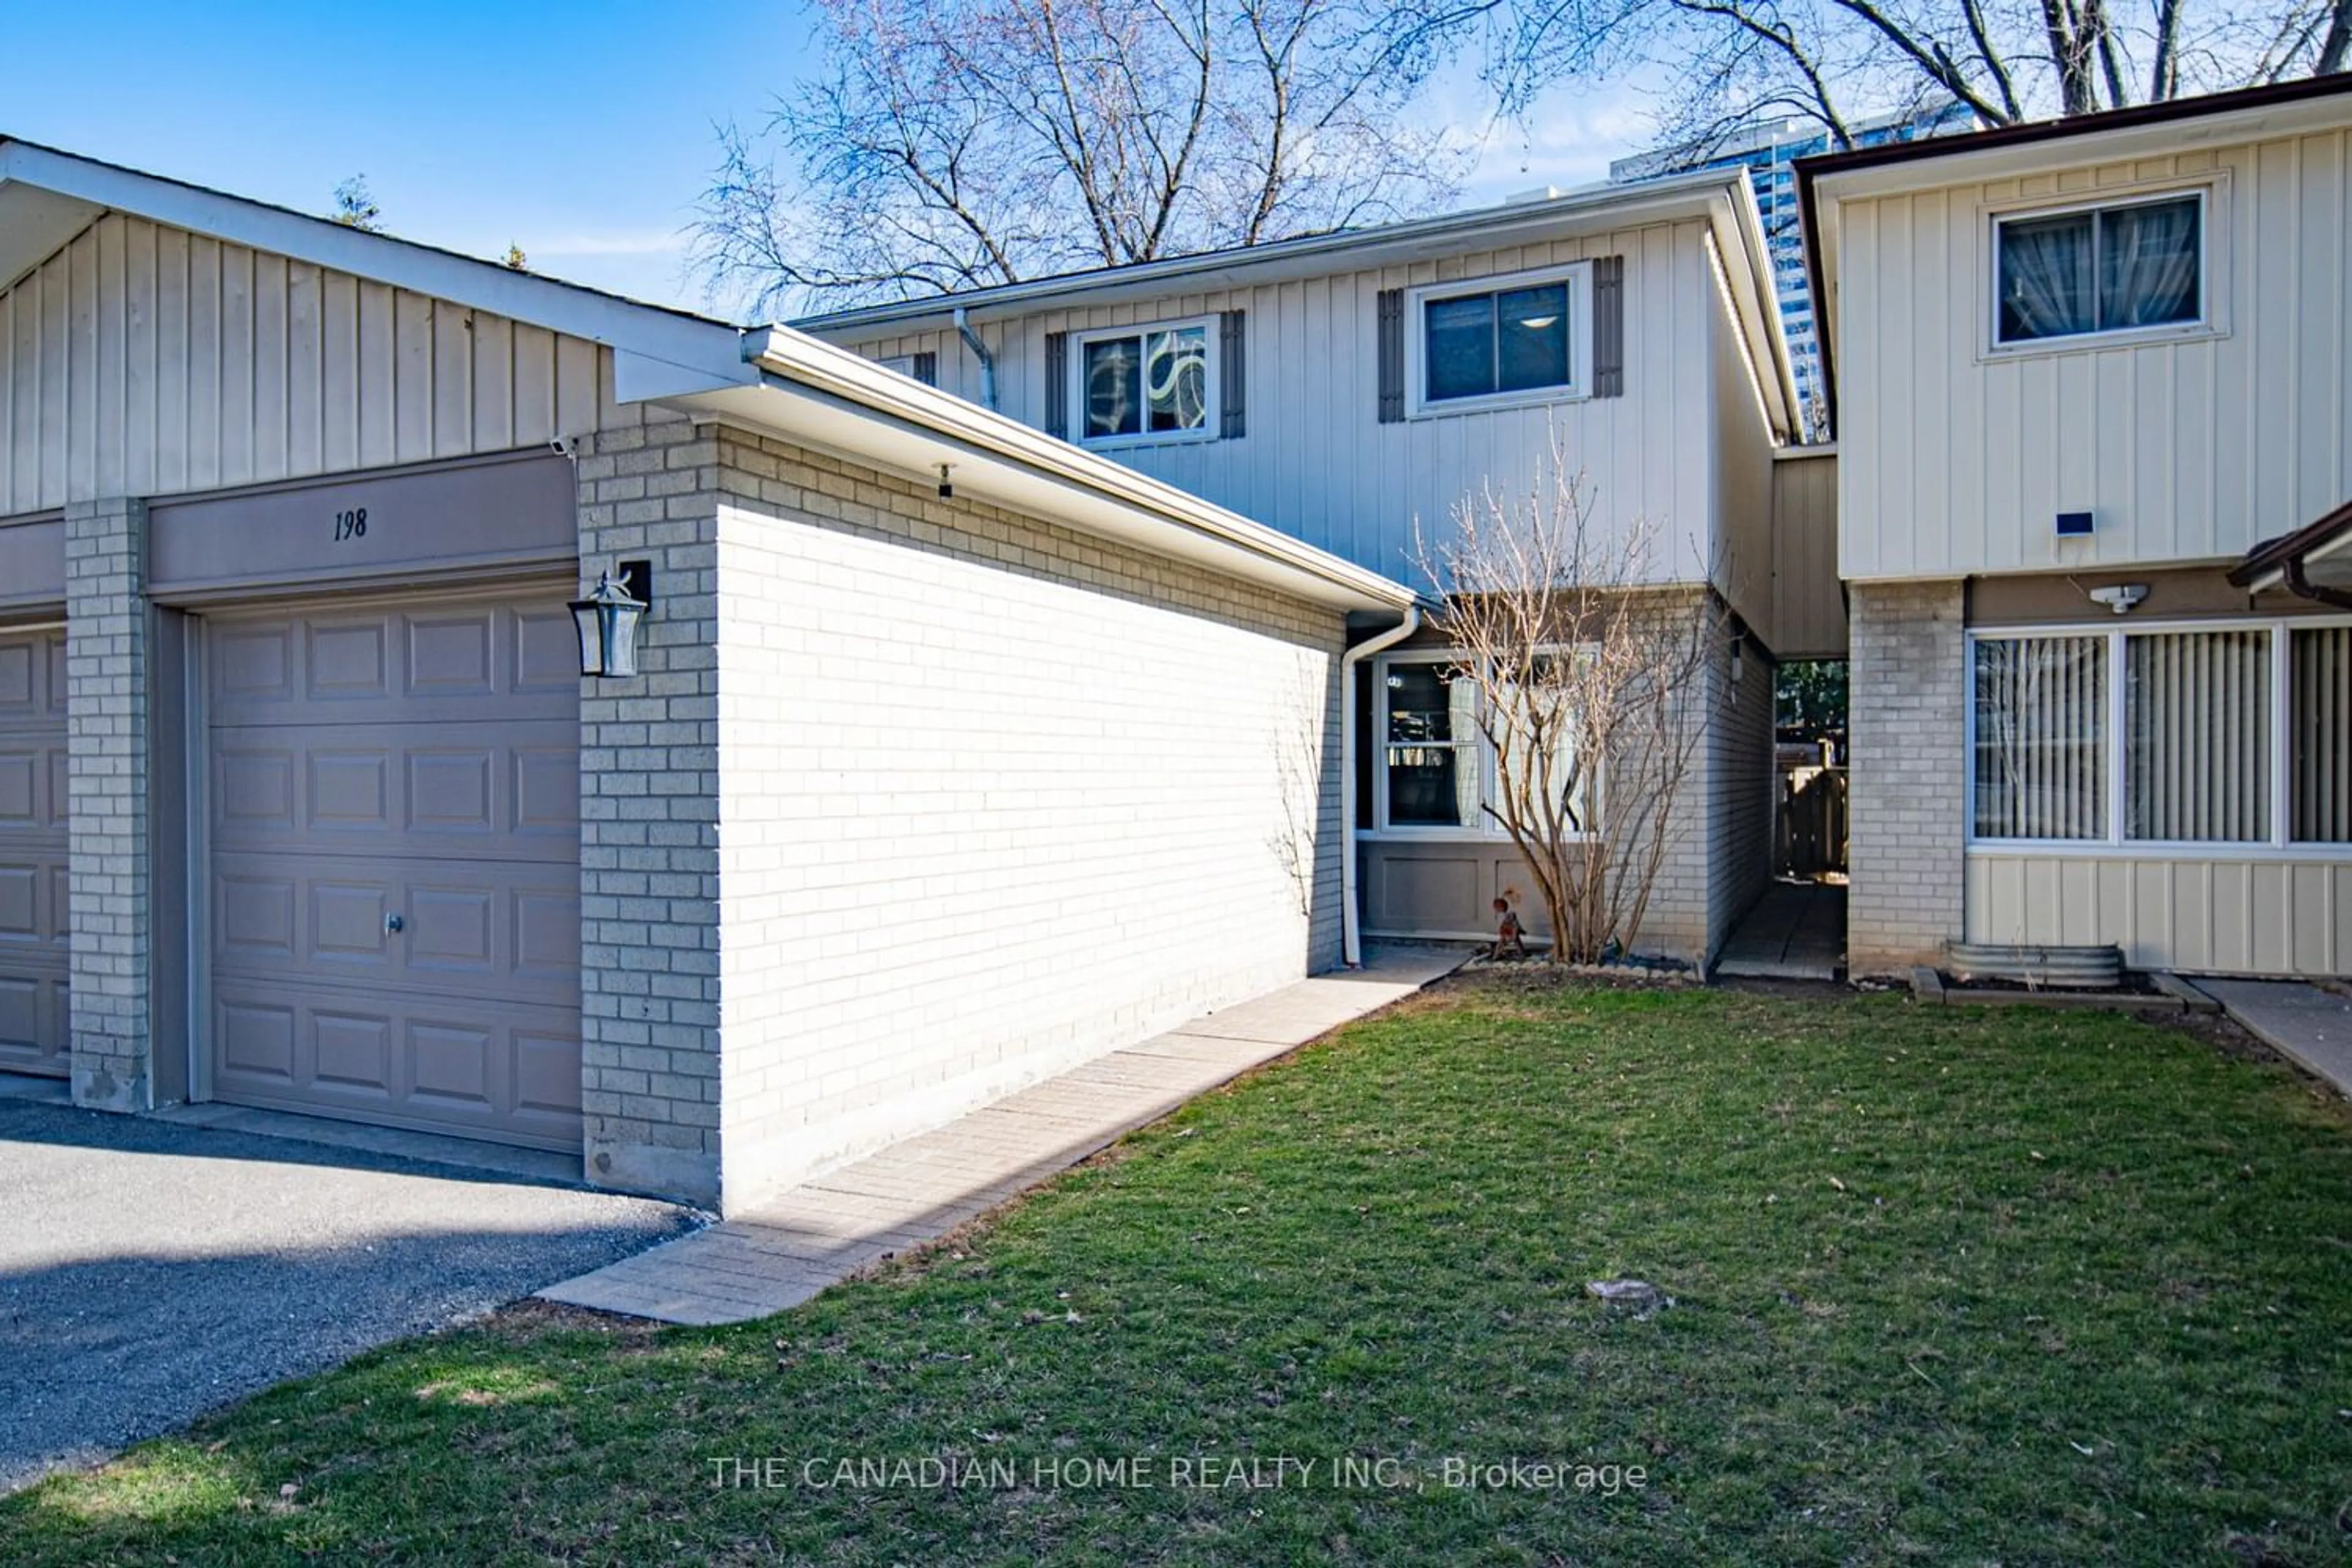 Frontside or backside of a home for 198 Antibes Dr, Toronto Ontario M2R 3H8